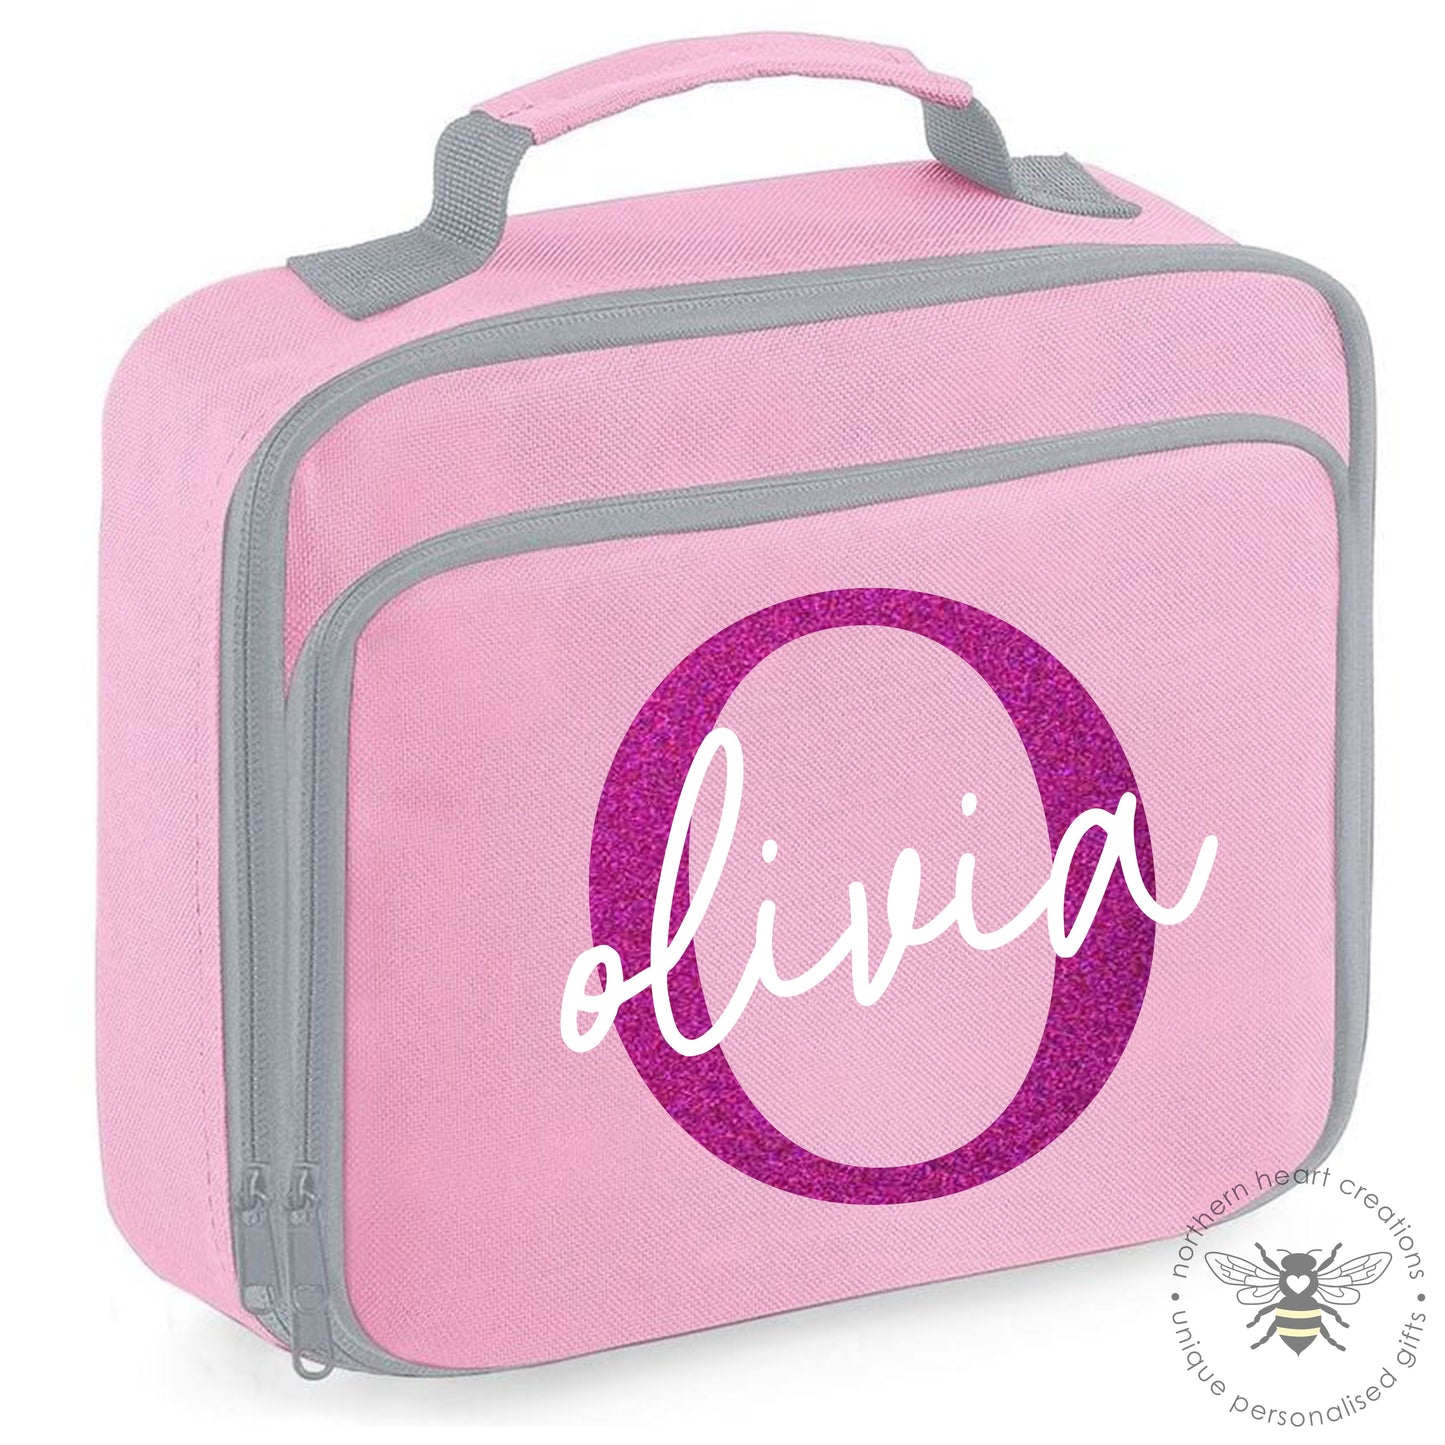 Personalised Lunch Cooler Bag Name & Initial